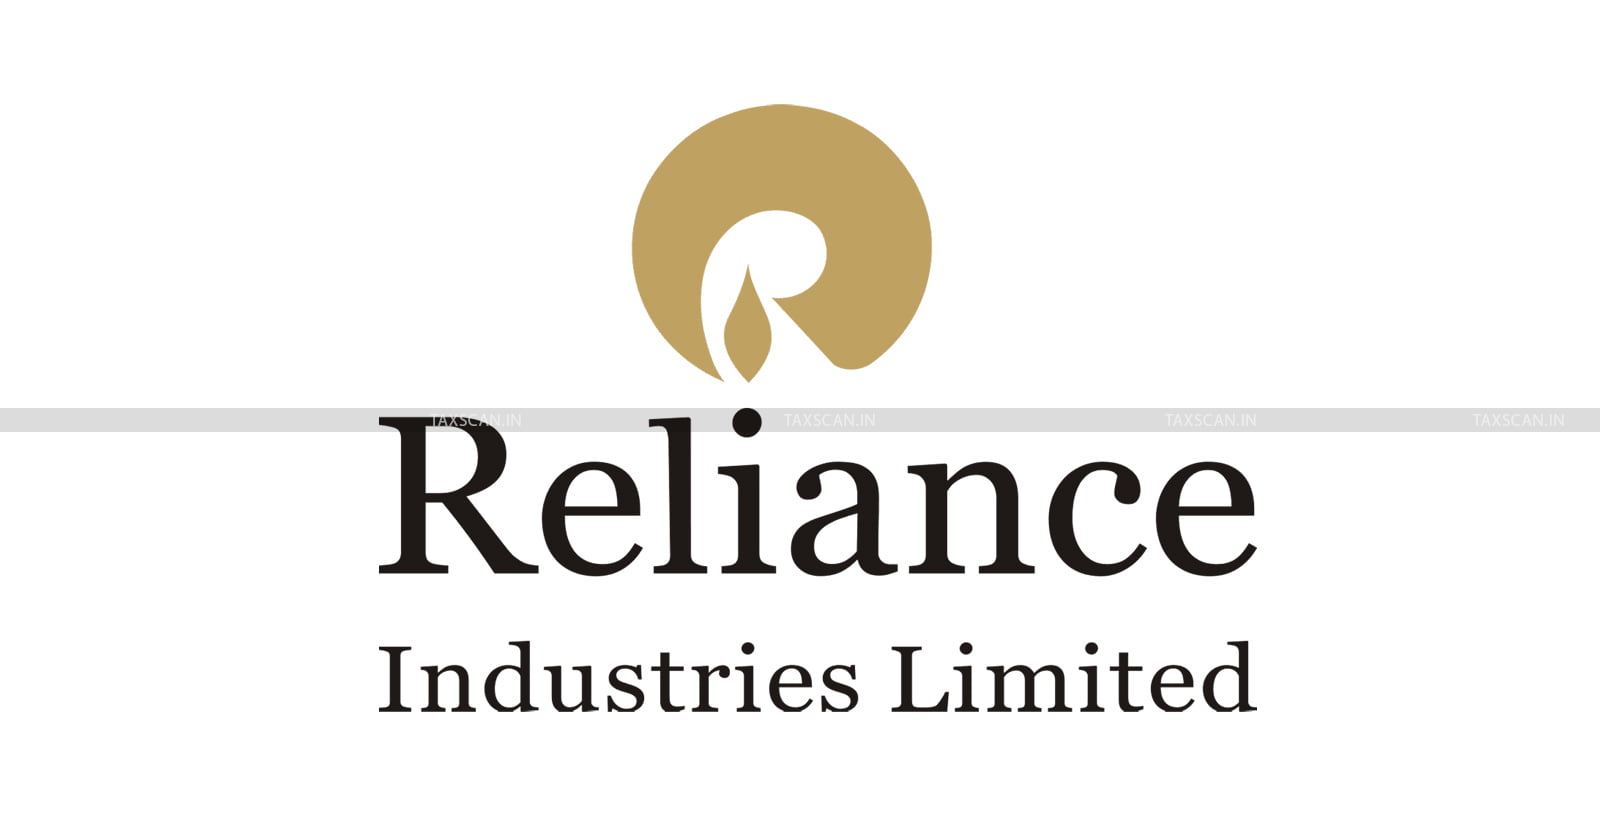 Set back - Reliance Industries-CESTAT - Rejection of Customs Duty Refund - Clearance of Crude Petroleum Oil - Short Payment - Customs Duty-TAXSCAN